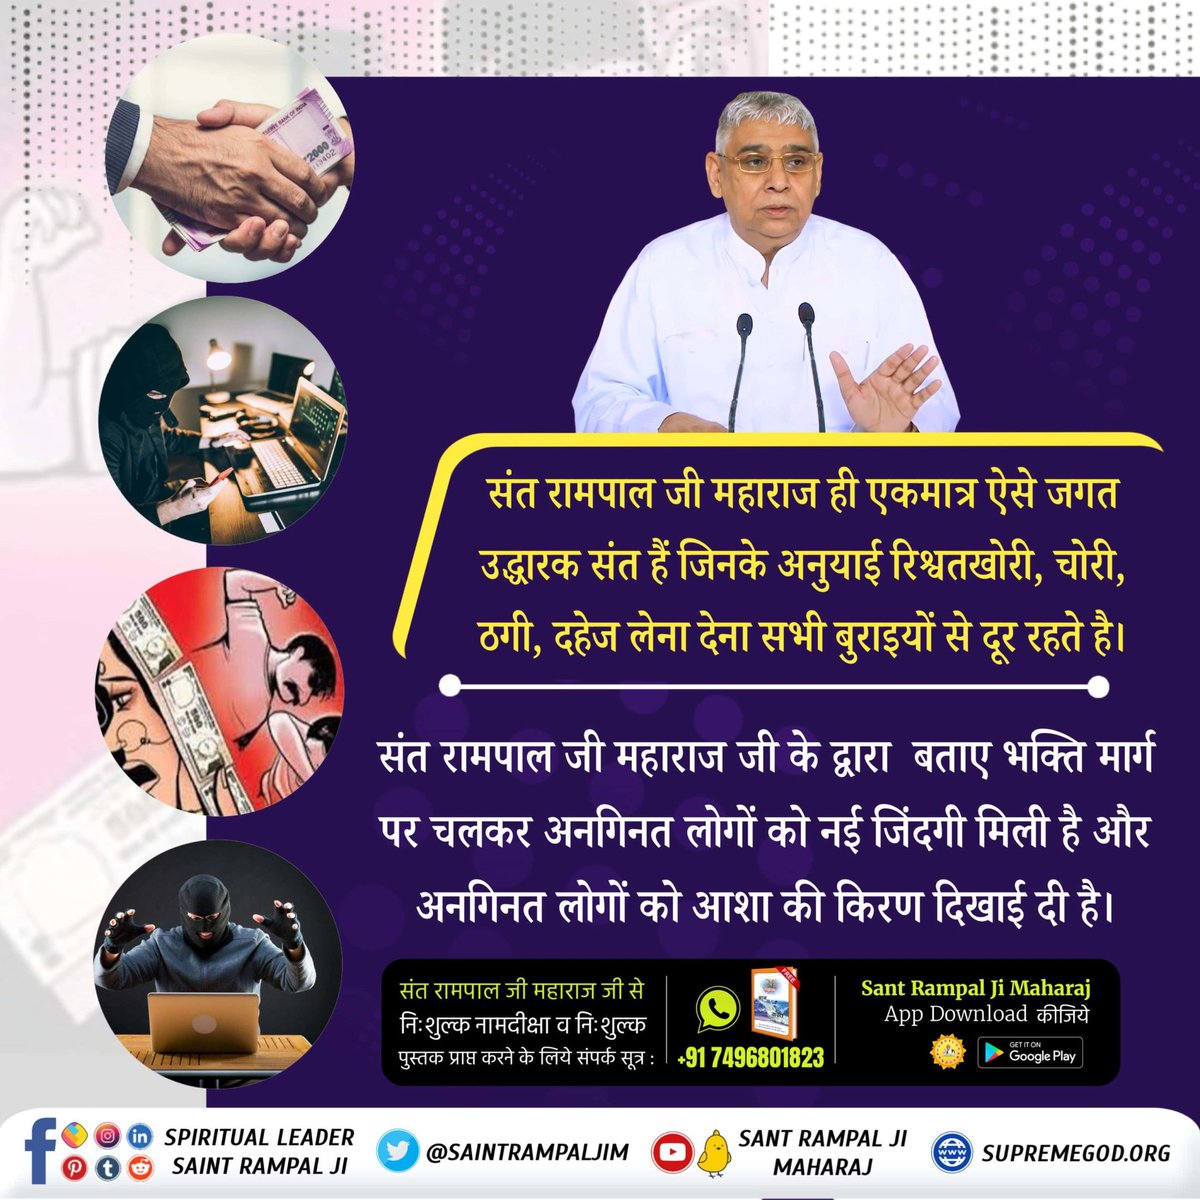 #जगत_उद्धारक_संत_रामपालजी Saint Rampal Ji Maharaj is the savior saint of the world who is today imparting good devotion to the human society and making them aware of the truth.🌼🌼 Saviour Of The World